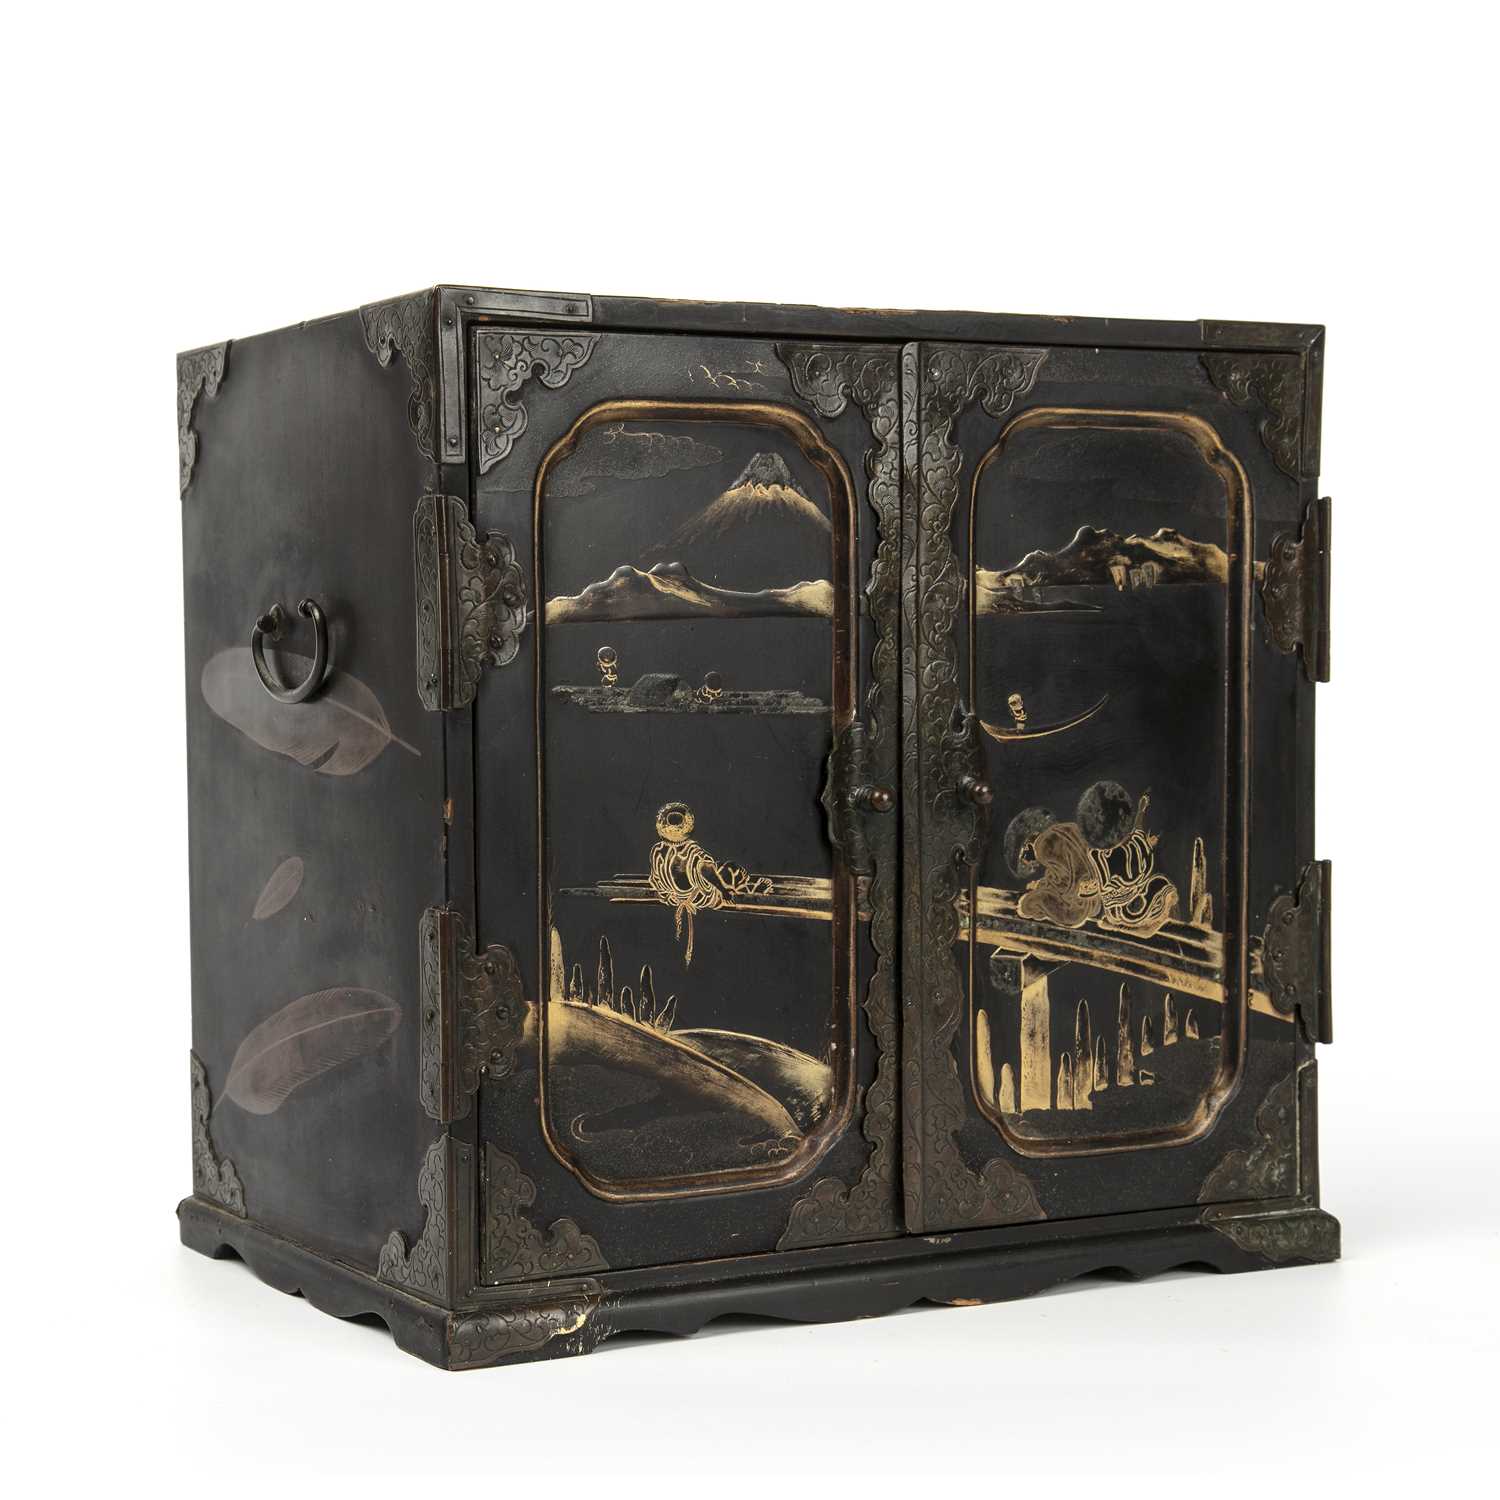 An antique Japanese lacquered table cabinet with gilded decoration, twin panelled doors opening to